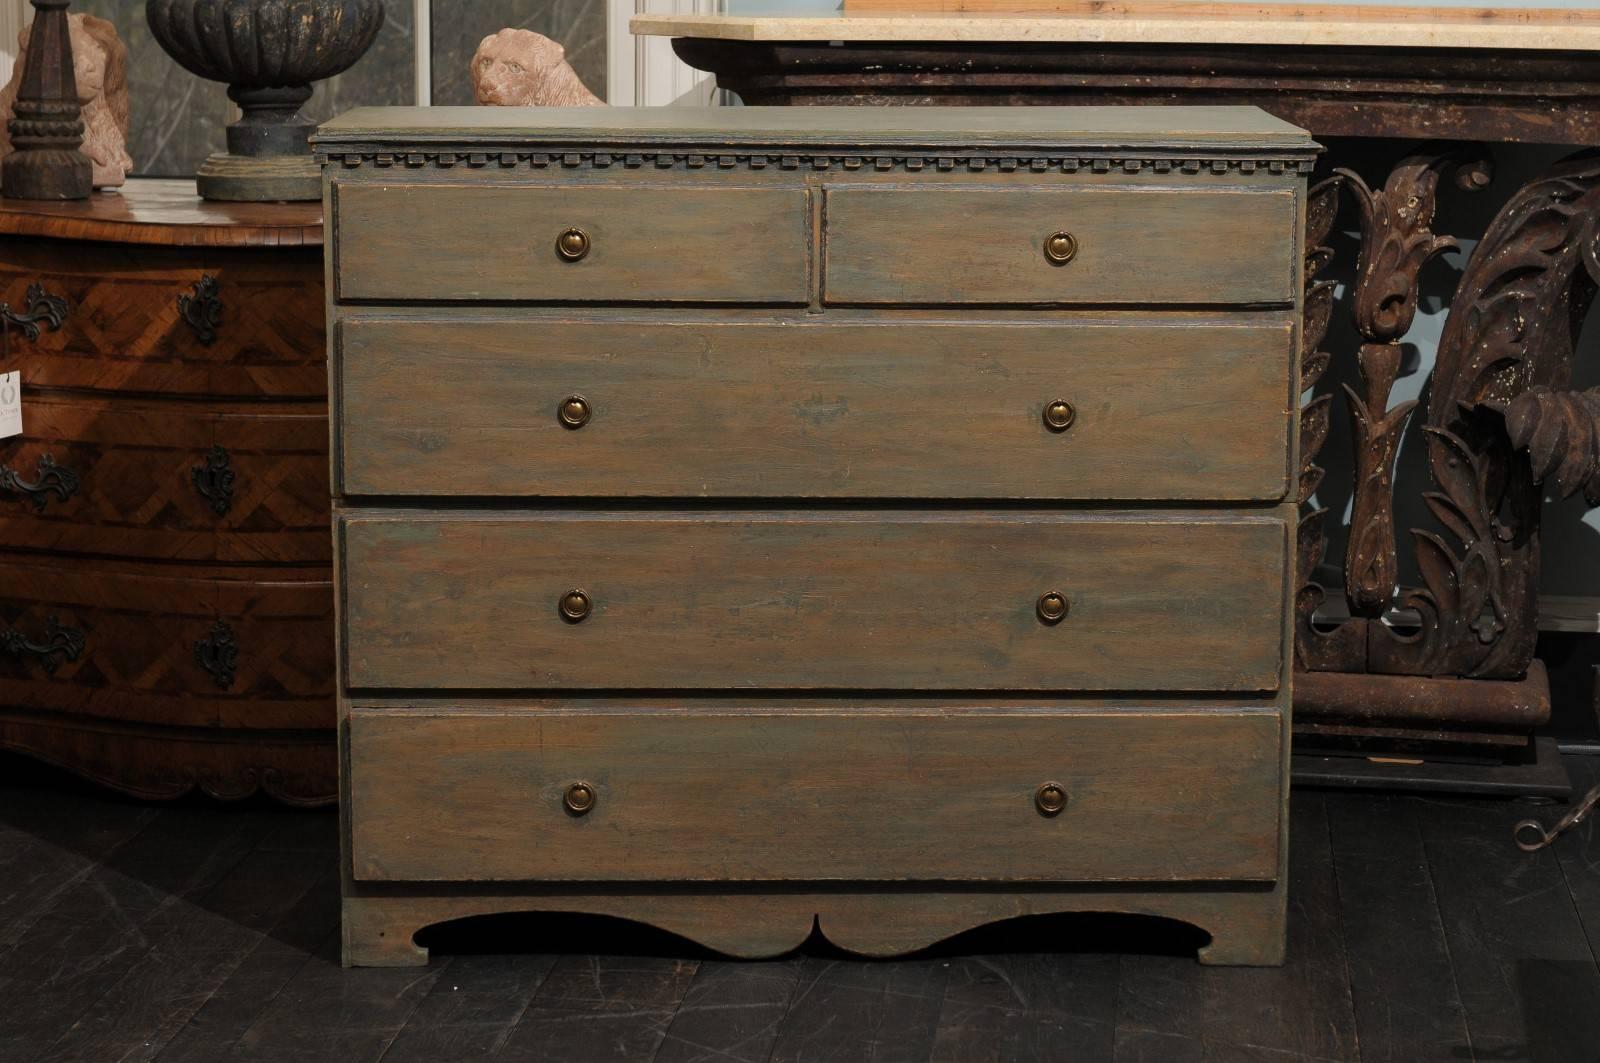 A Swedish early 19th century Karl Johan five drawers painted wood chest. This chest is dark grey-green in color with taupe undertones as well as darker blue trim. This Swedish chest from circa 1830-1840 features two smaller drawers over three larger